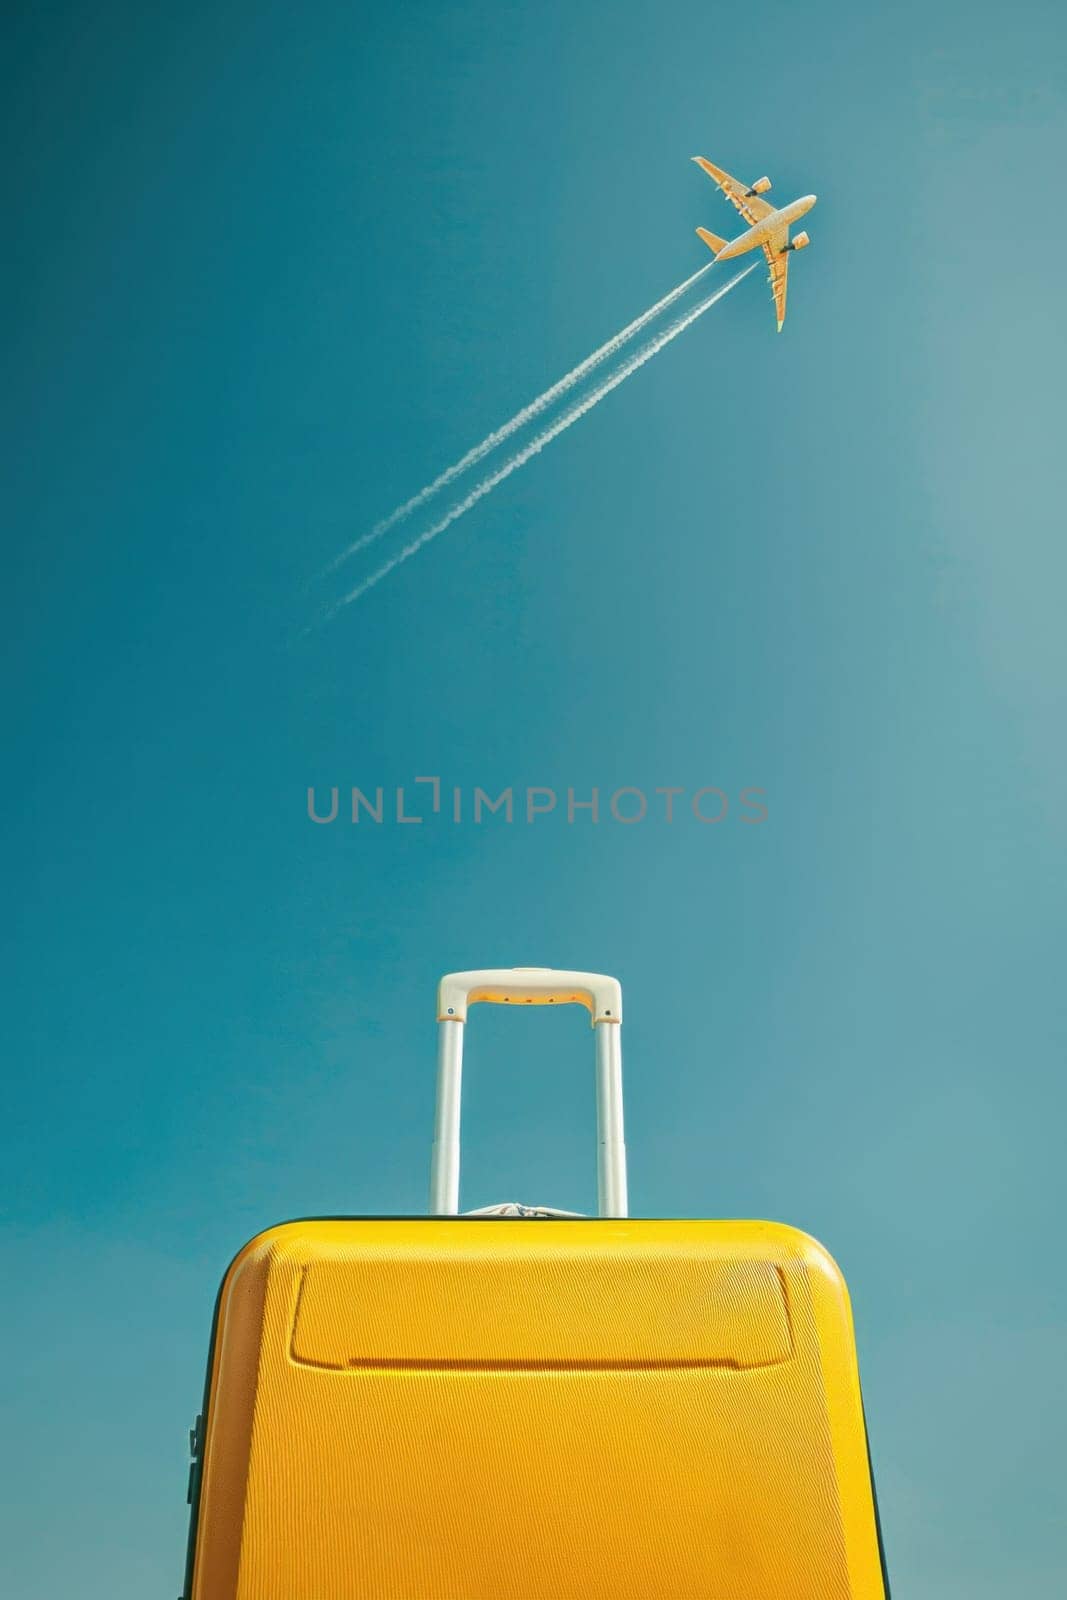 Idyllic beach travel scene with yellow suitcase, airplane flying overhead, relaxing vacation atmosphere